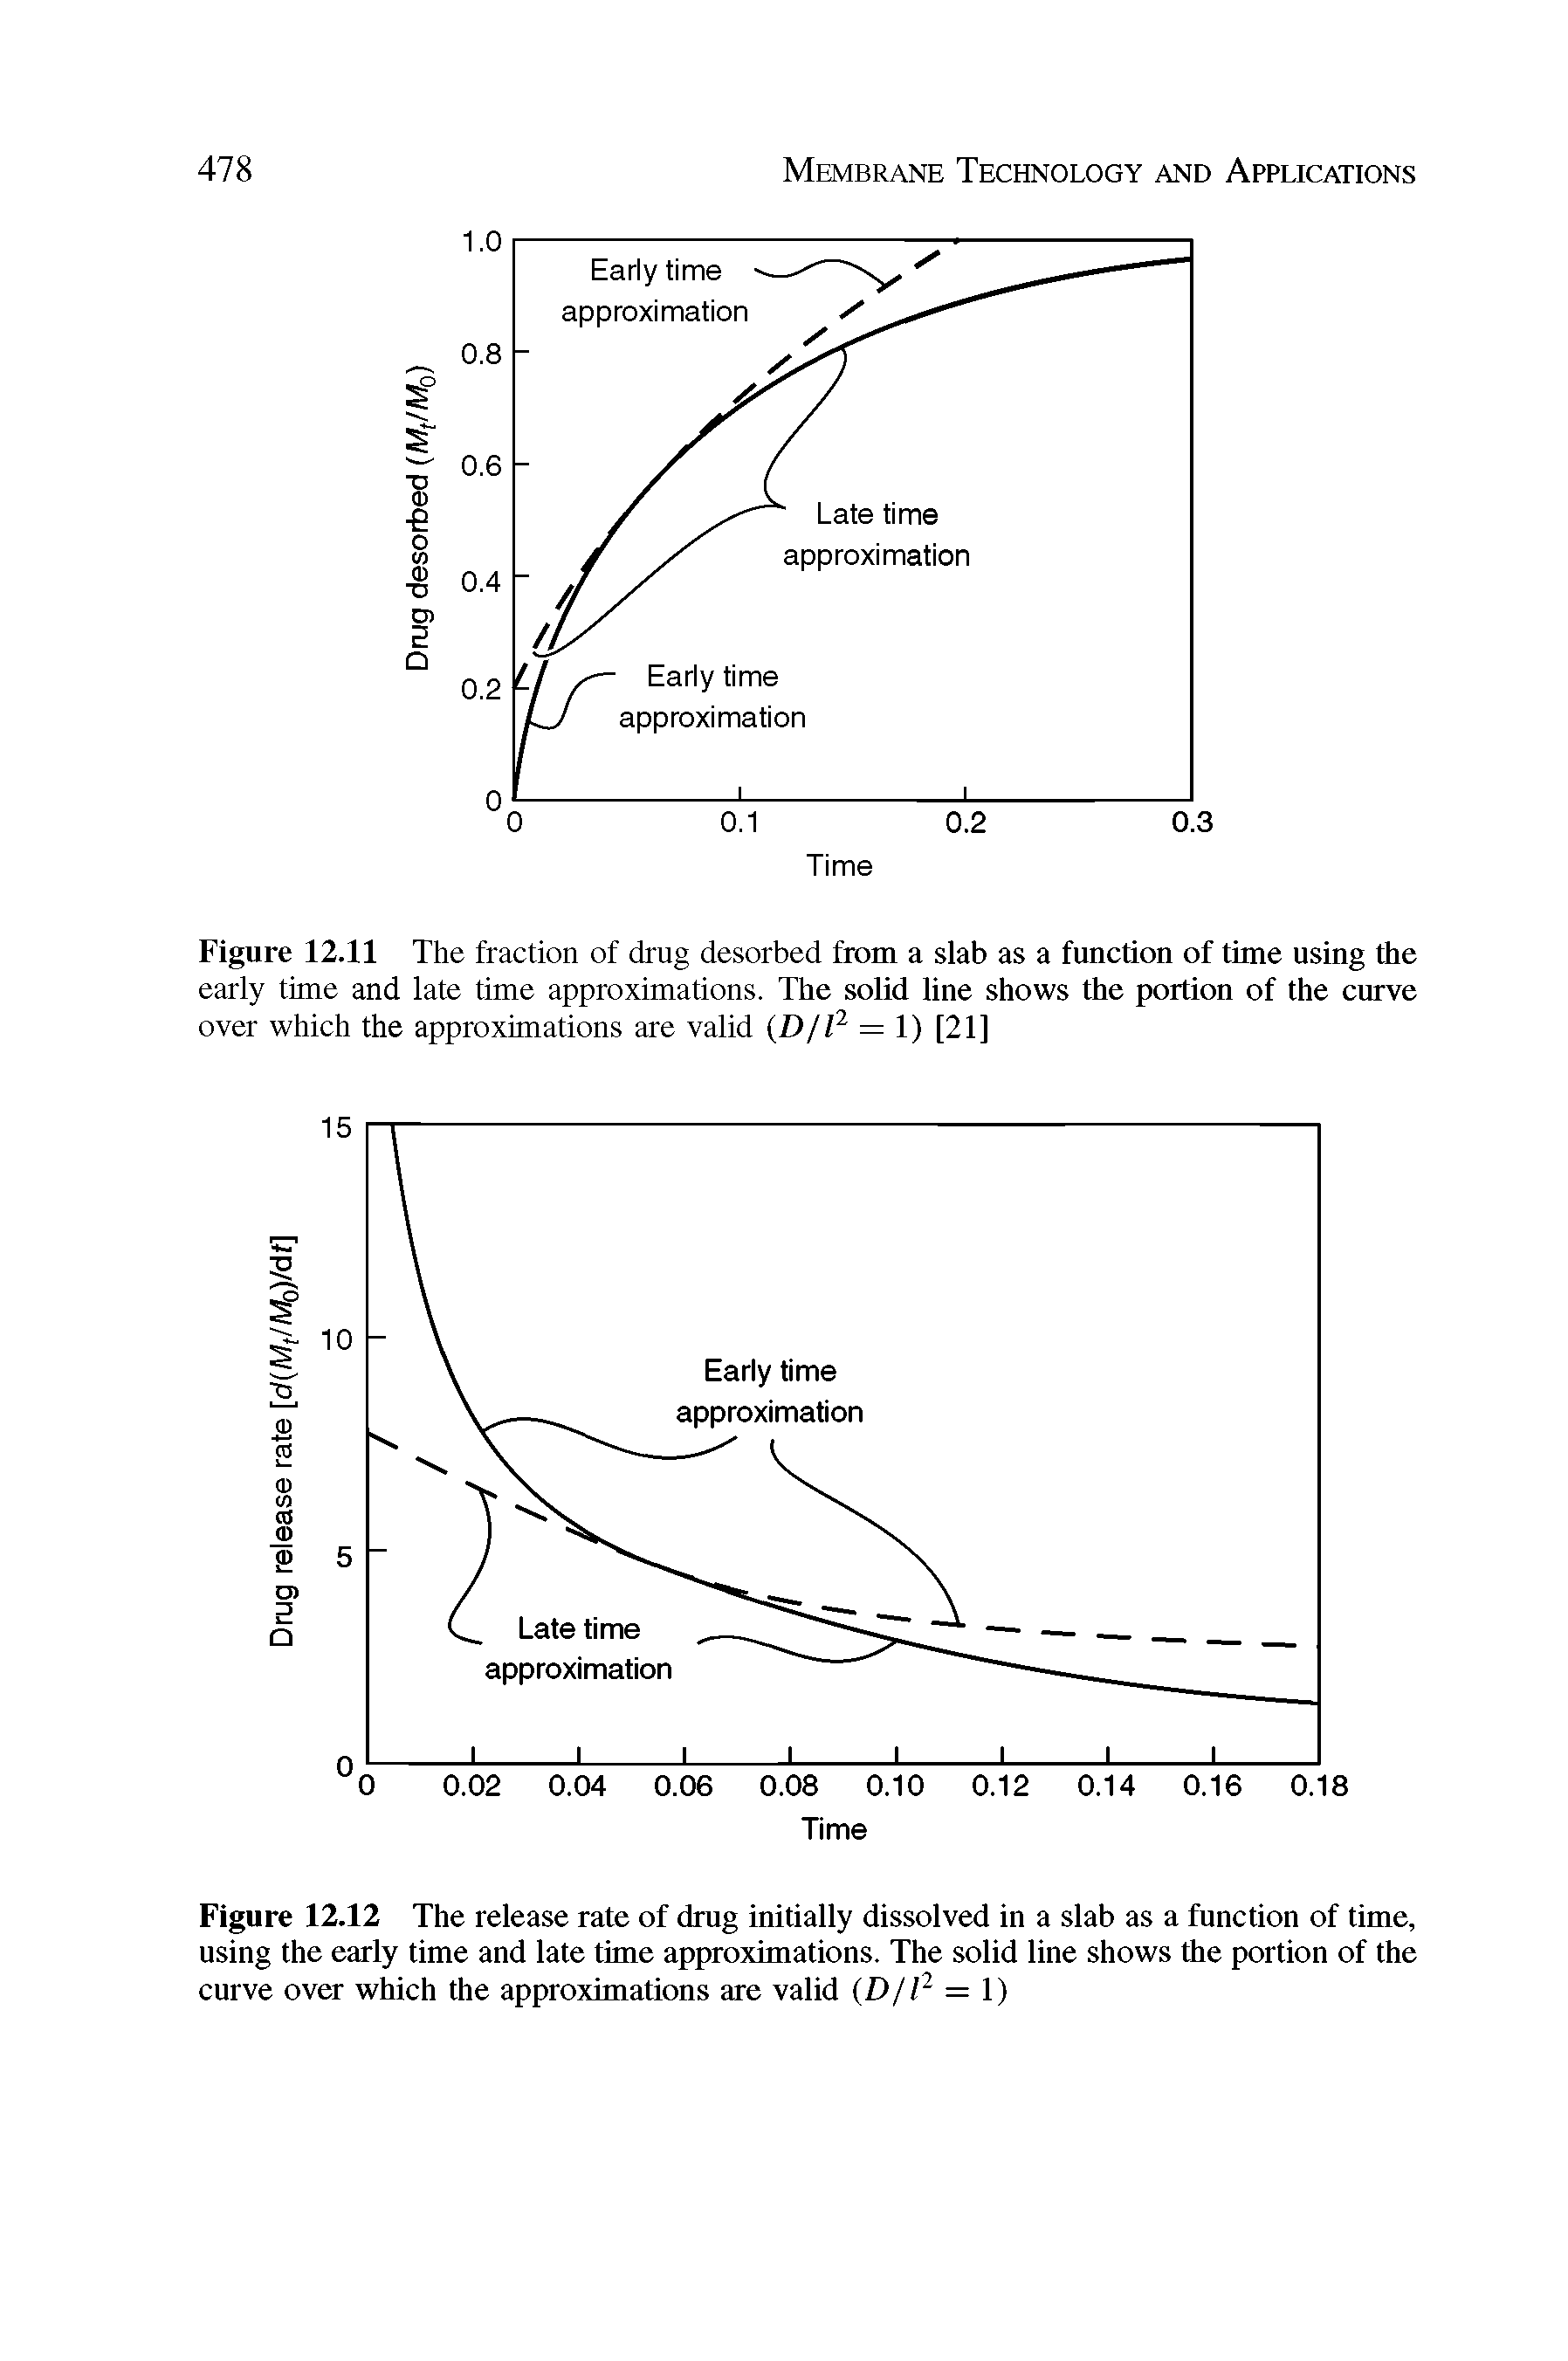 Figure 12.12 The release rate of drug initially dissolved in a slab as a function of time, using the early time and late time approximations. The solid line shows the portion of the curve over which the approximations are valid (D/l2 = 1)...